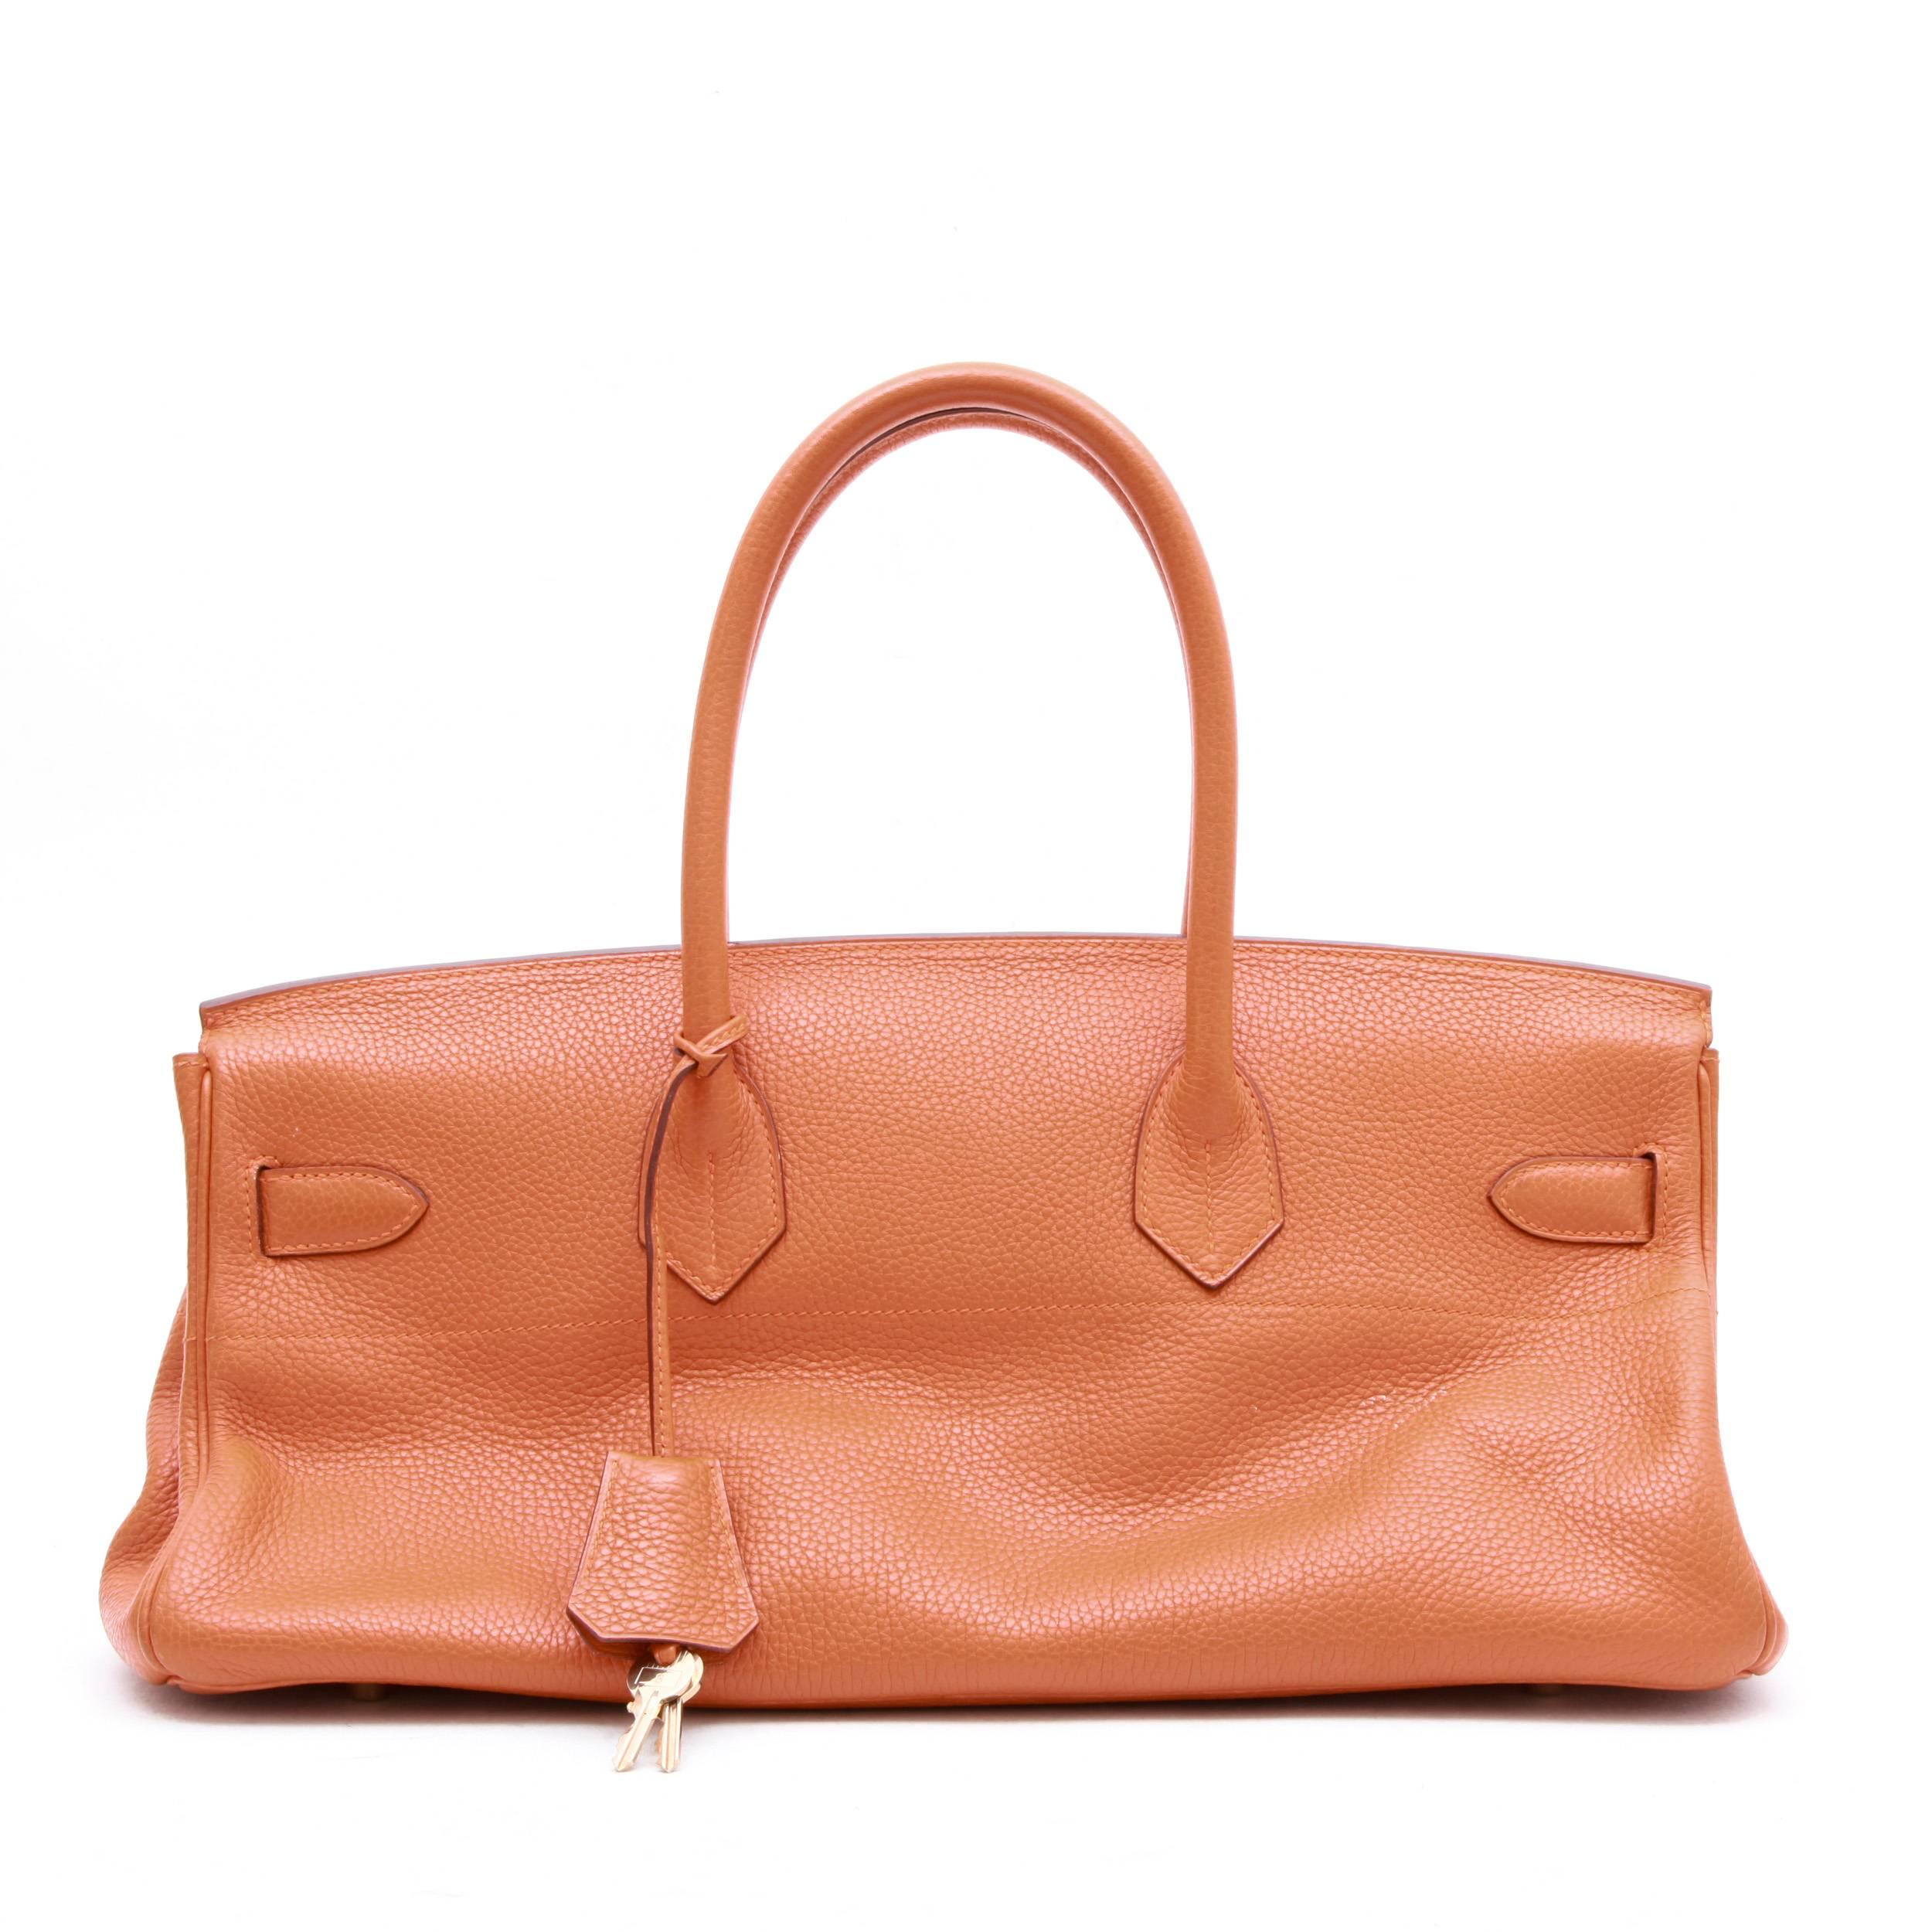 Hermès 'Shoulder' handbag in orange taurillon clémence leather. Palladium hardware.

Stamp I in a square, Year 2006. 

Will be delivered in its Hermes dustbag